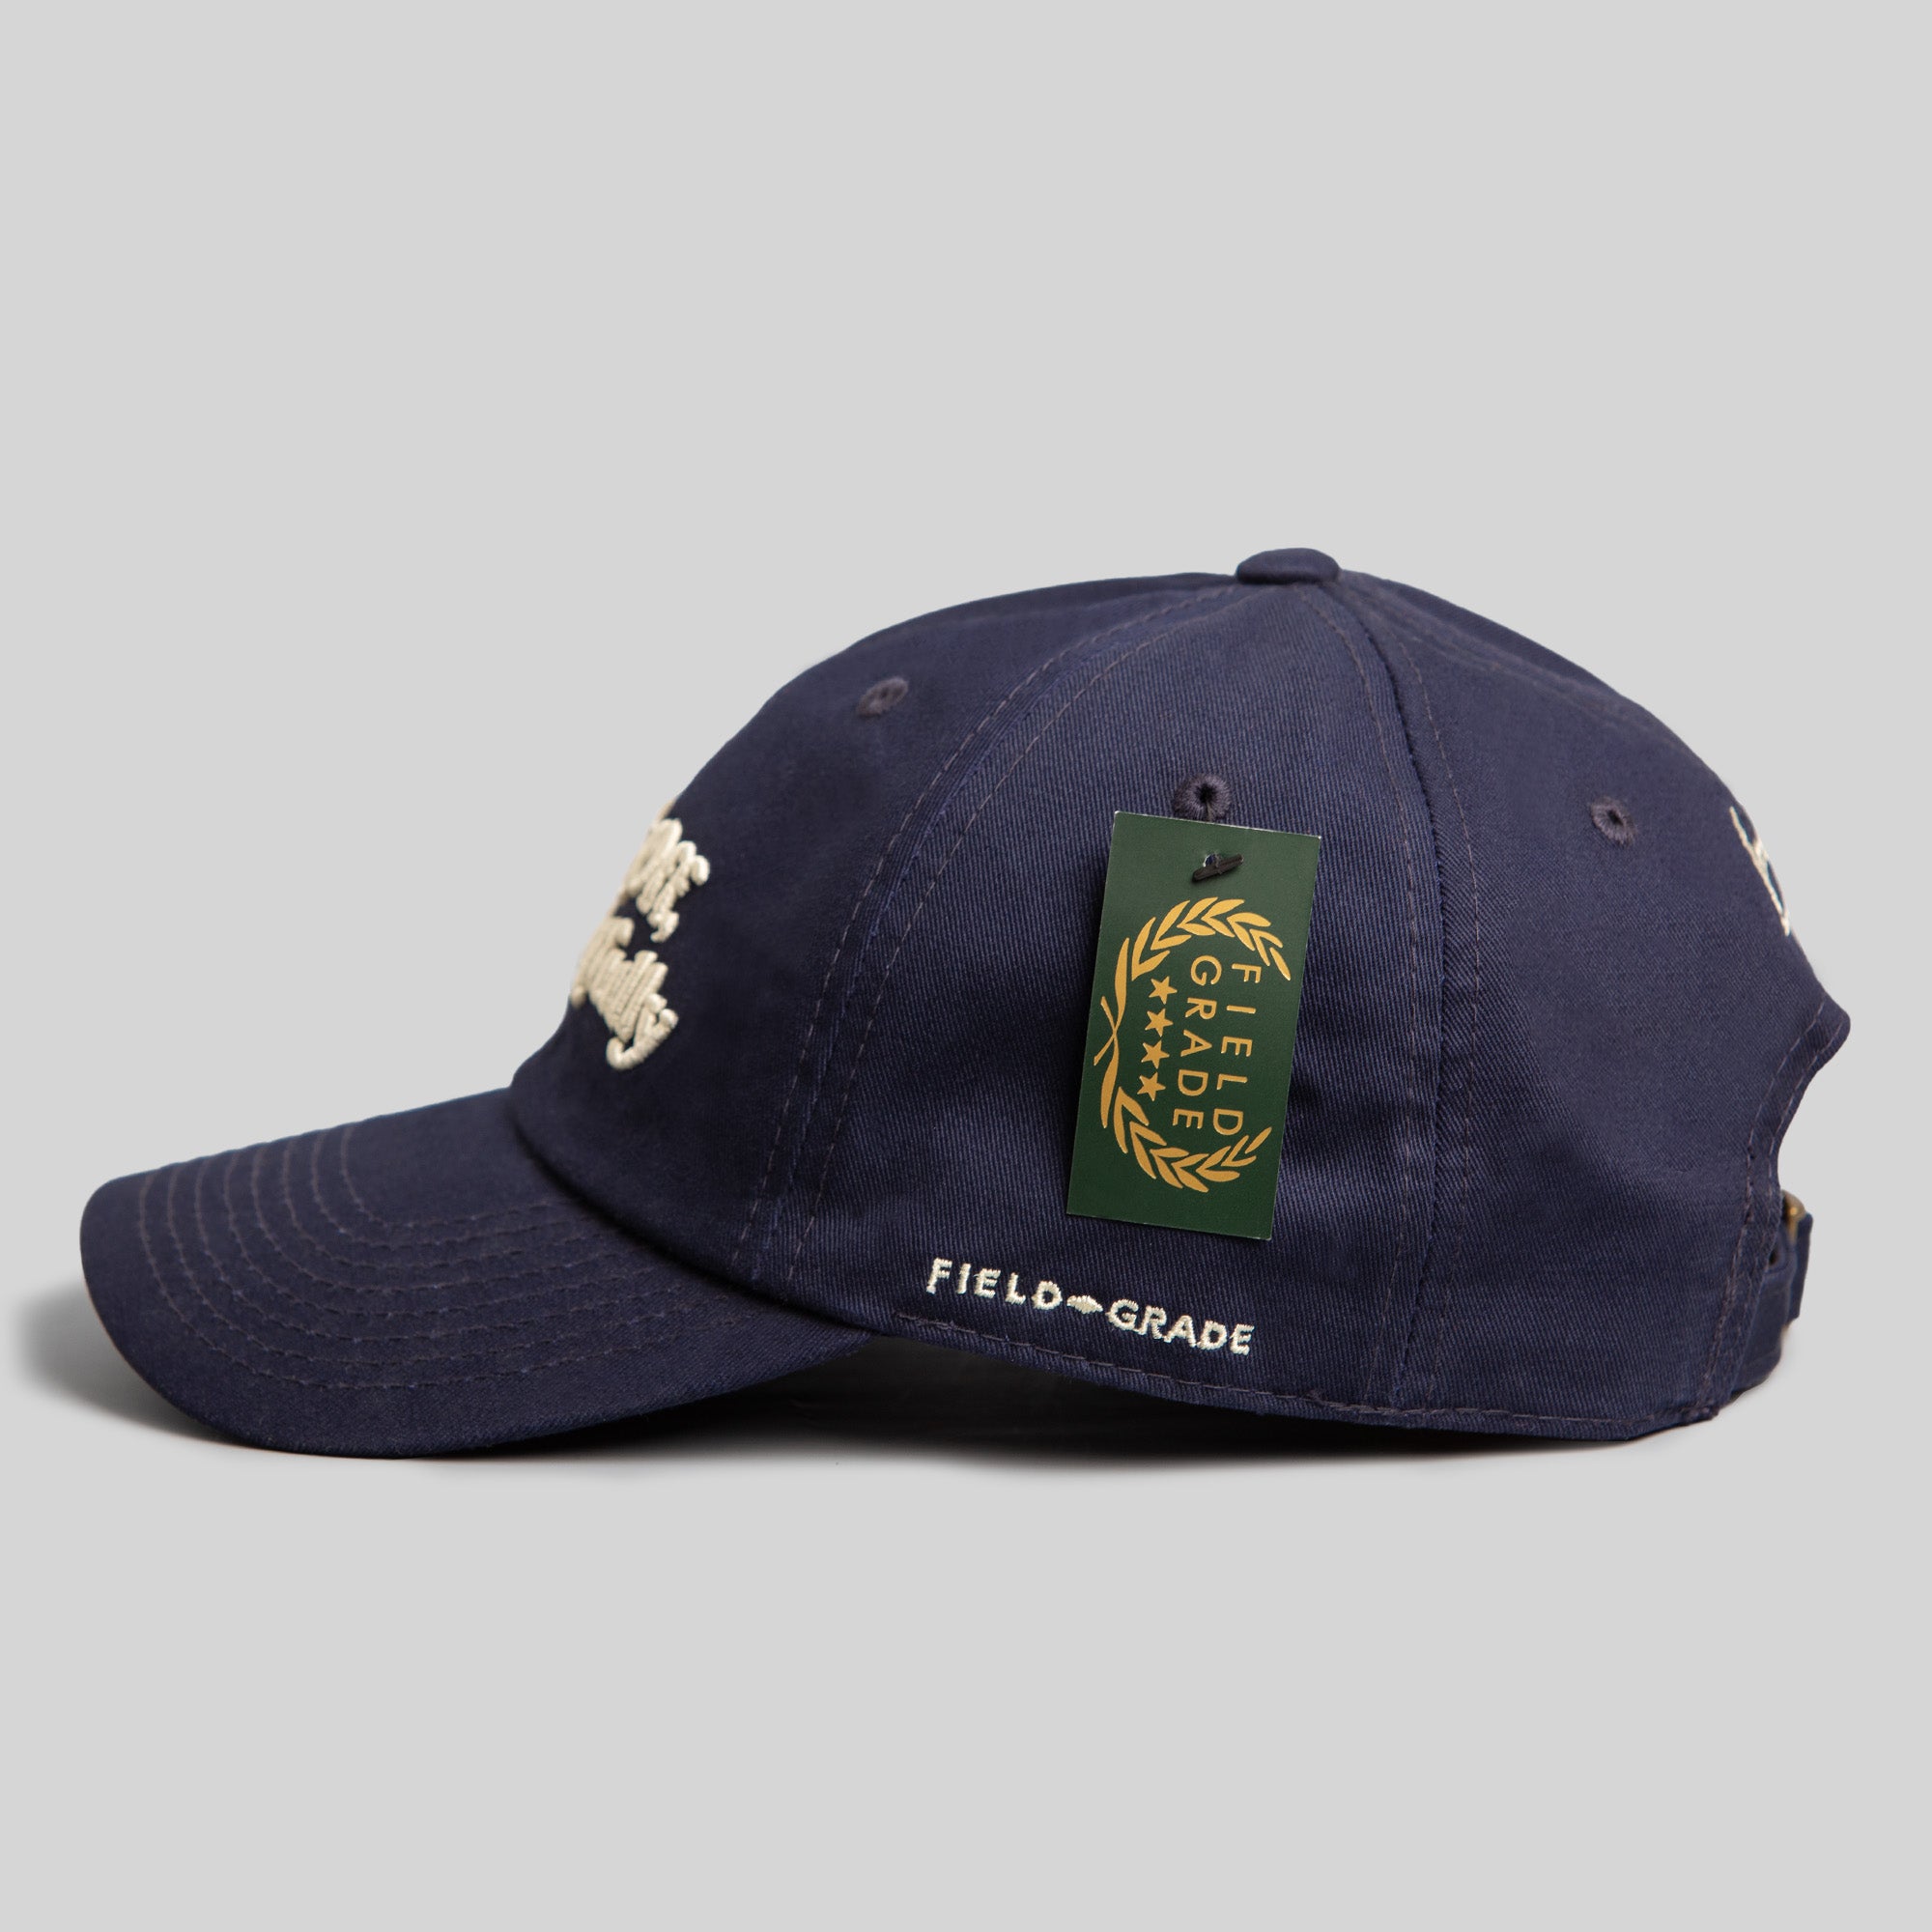 RESPECTFULLY DEEP NAVY RELAXED FIT HAT